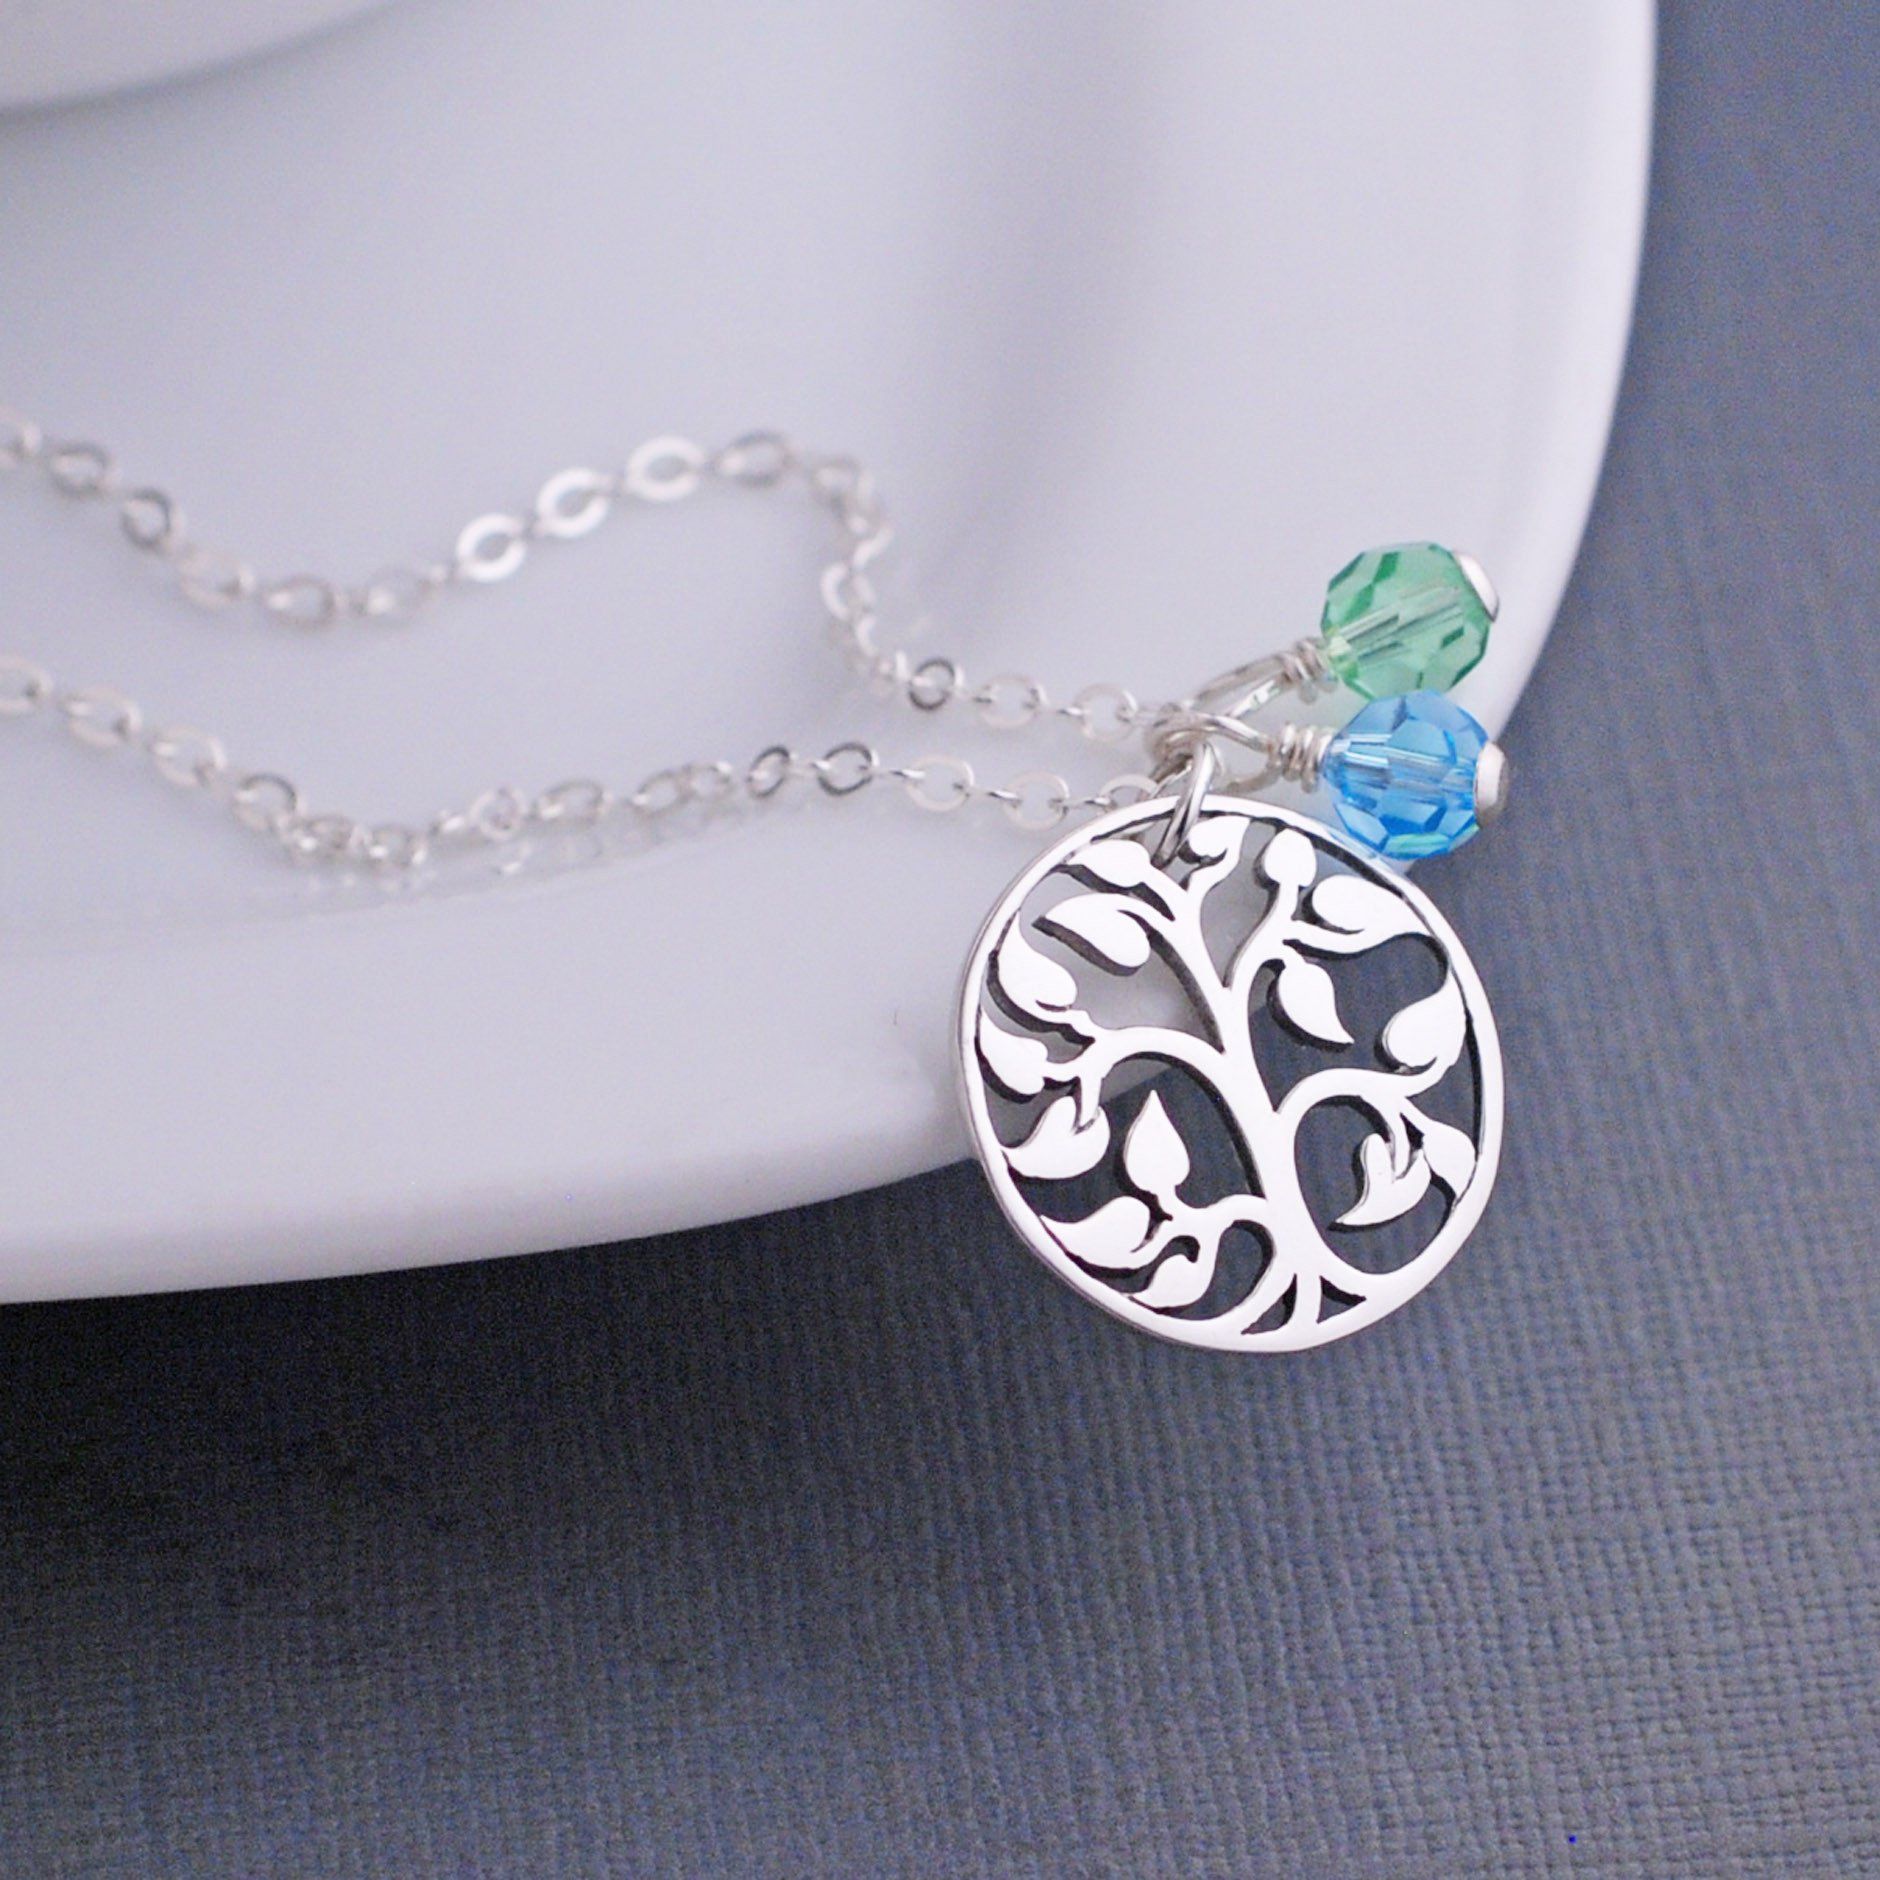 Tree Of Life Necklace Resin Plastic Water Drop Pendant Necklaces Women's  Jewelry | eBay